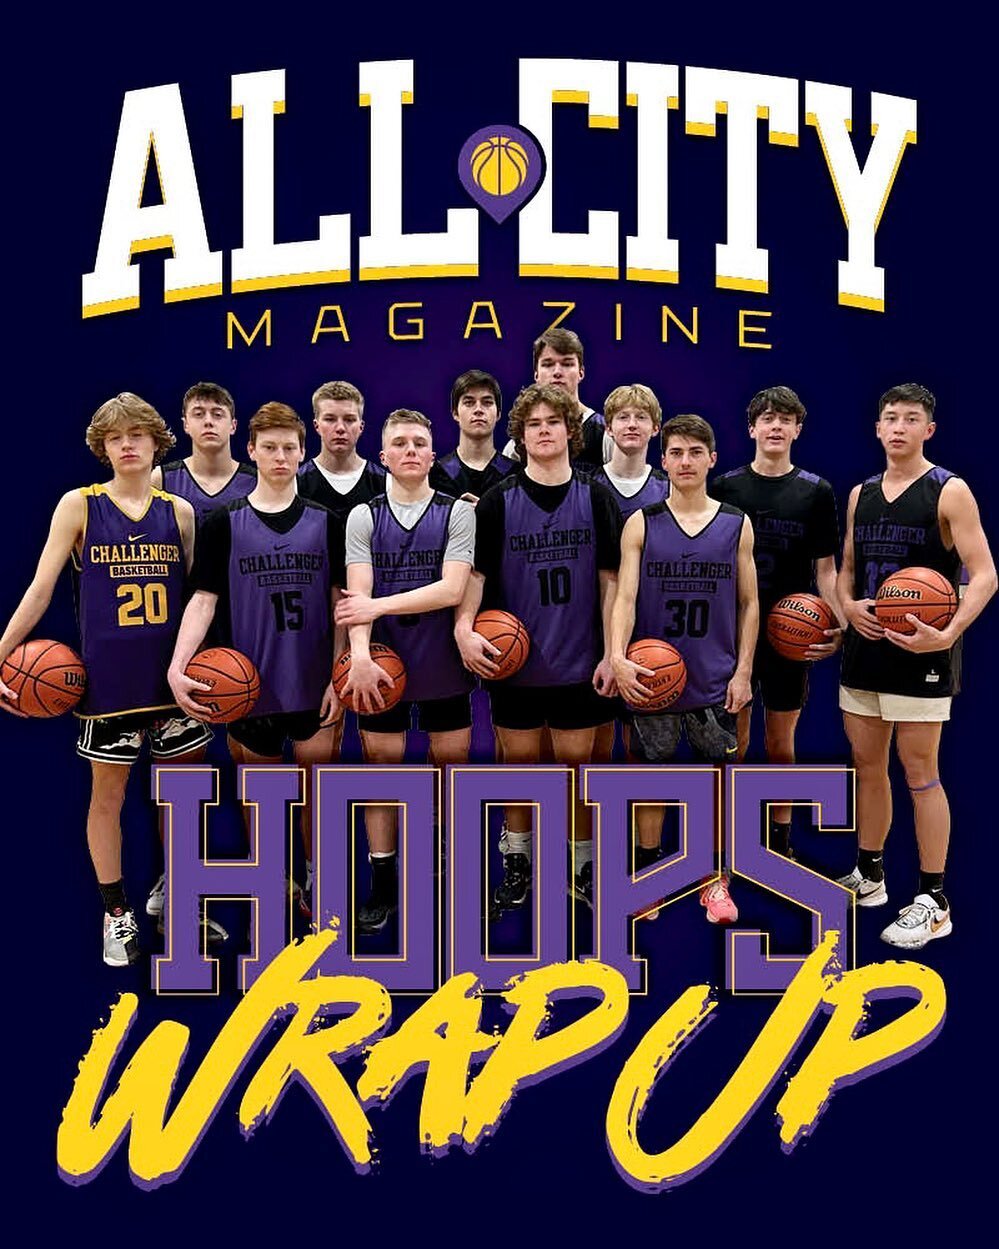 Issue 005 incoming!!! Shoutout to @cchs_bball our #CoverStory and reigning back2back champs! 👑